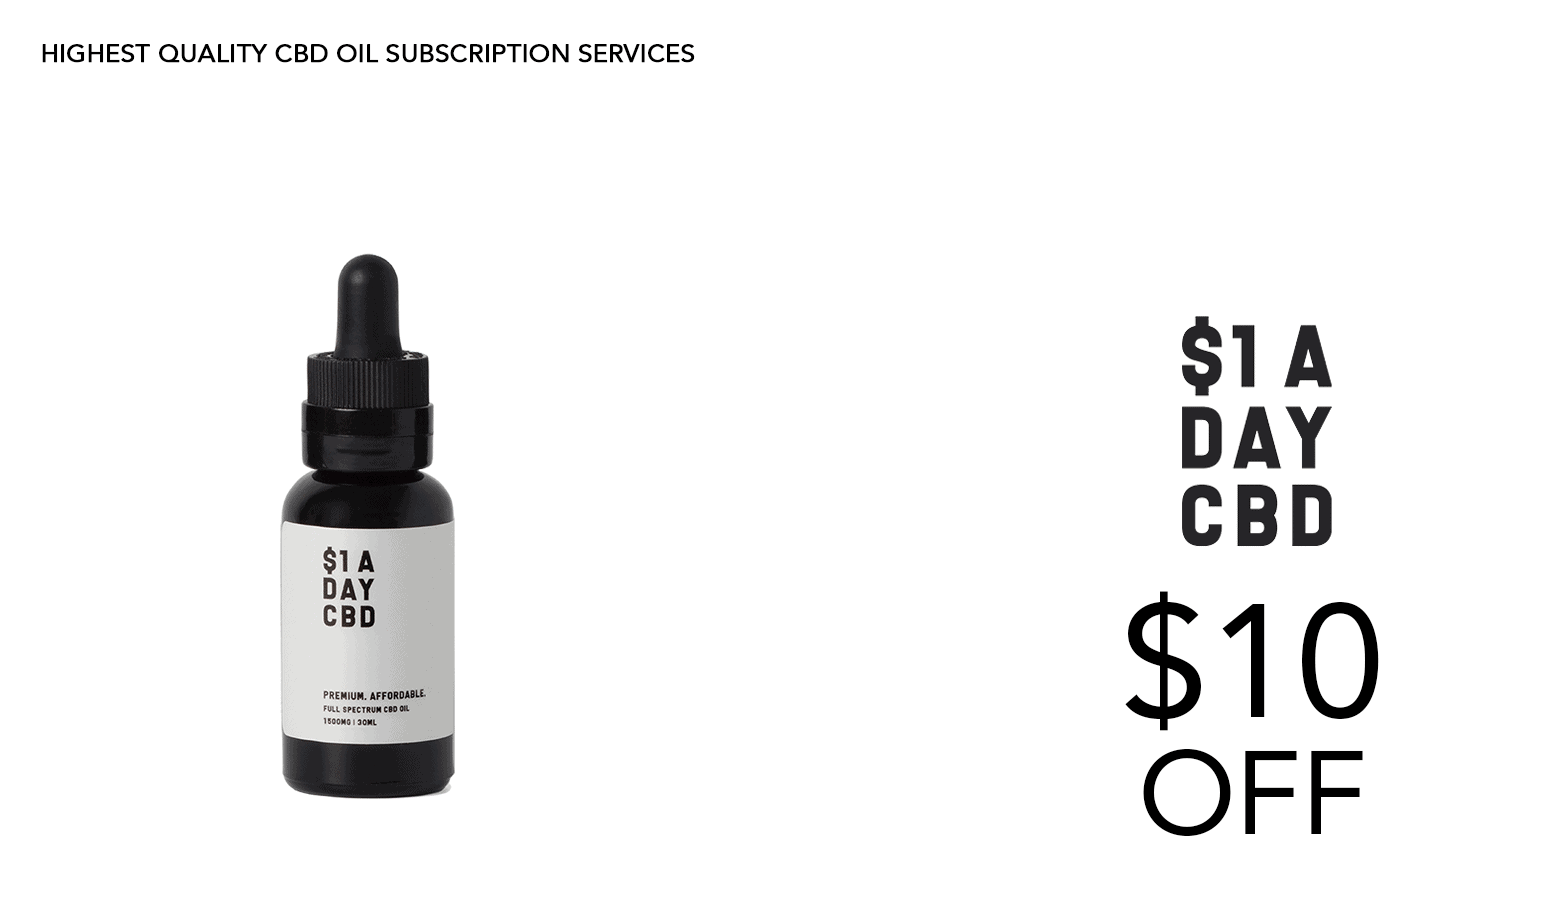 Dollar a Day CBD Coupon Code Discount Offer